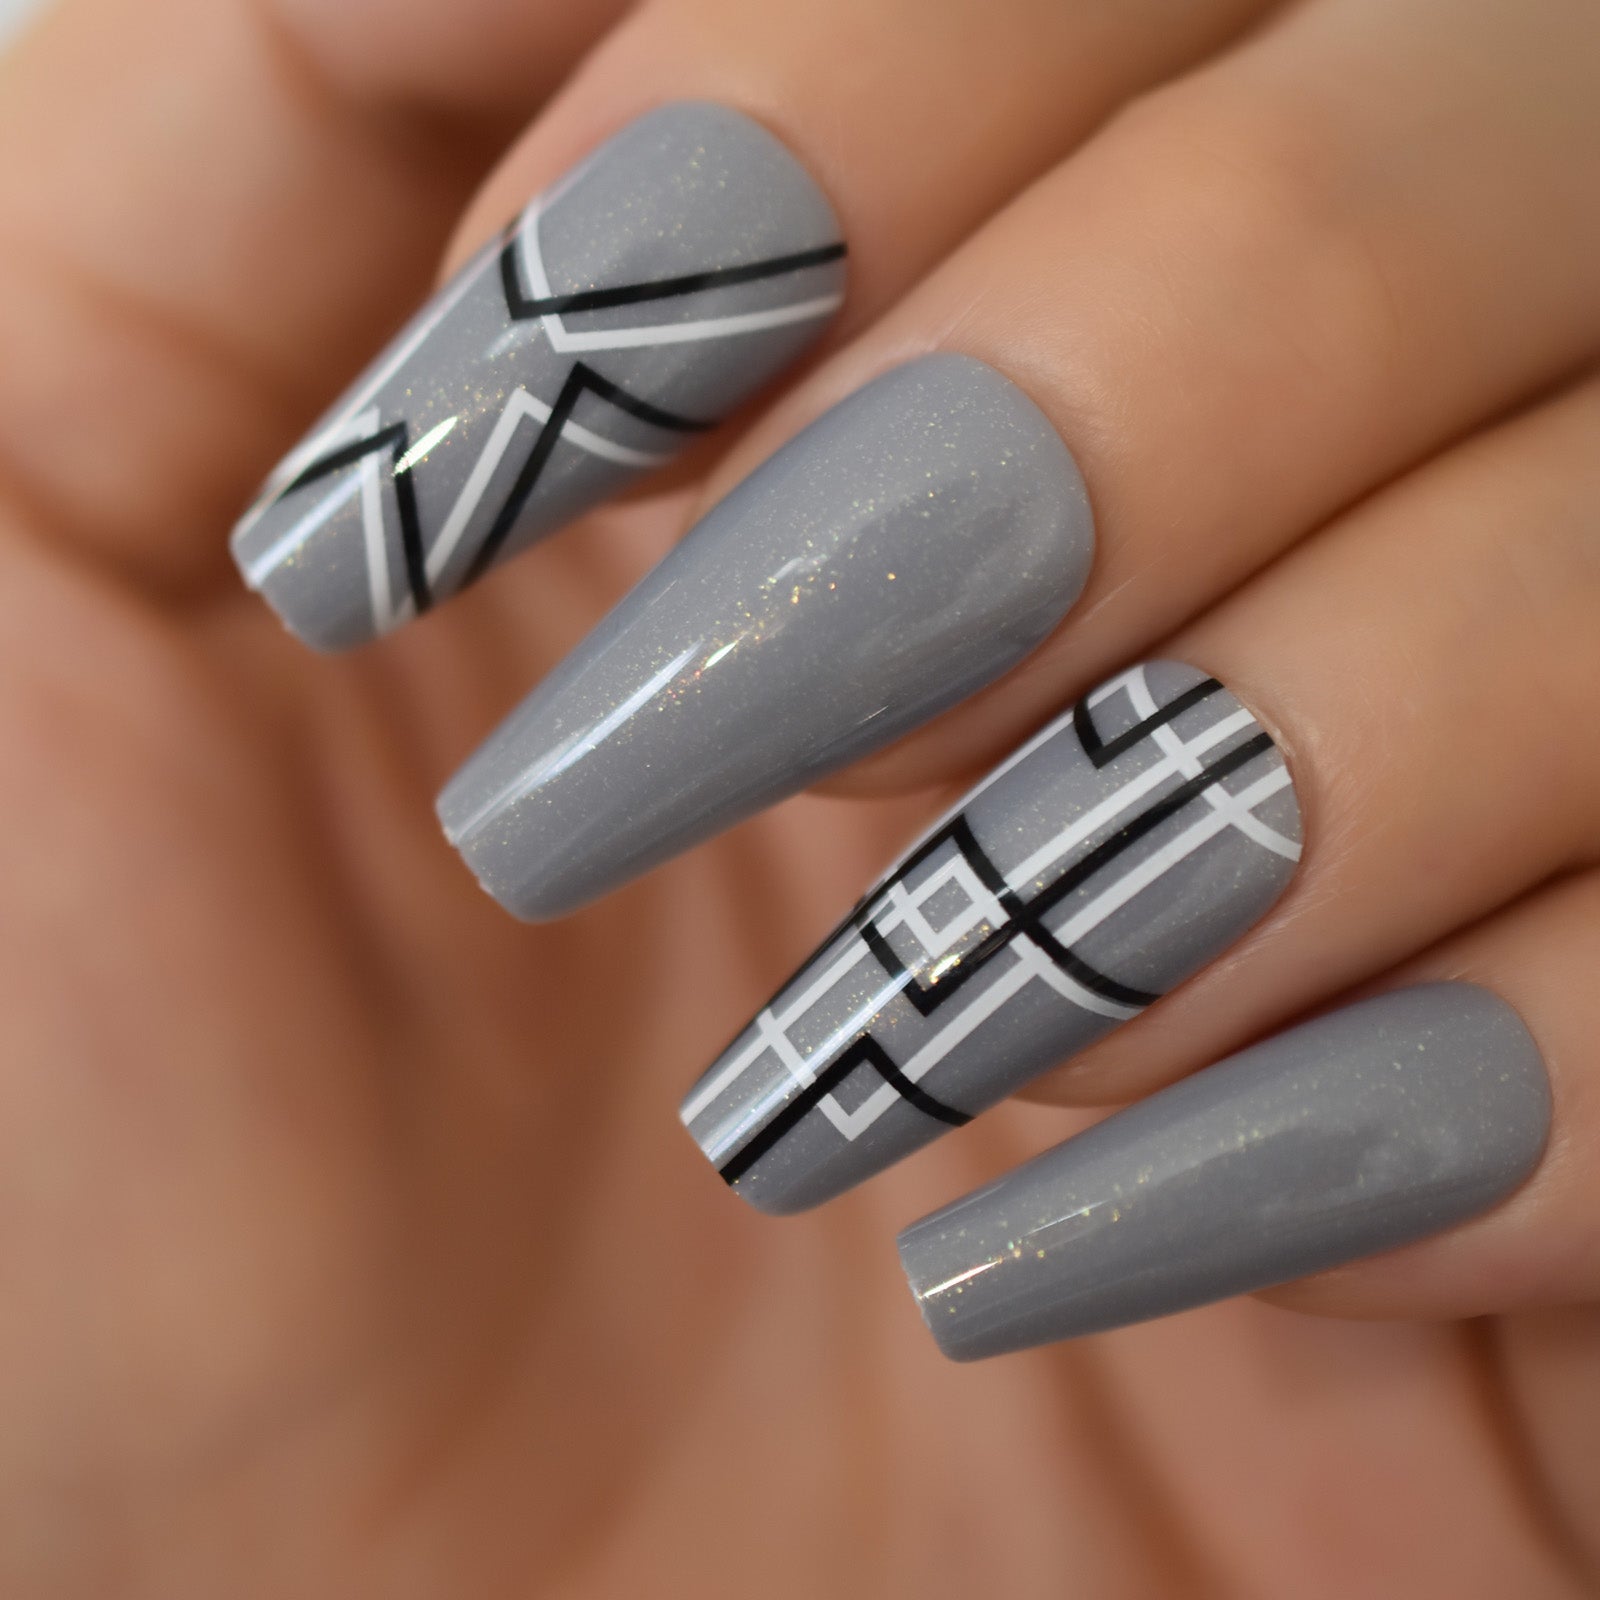 Nail Art: Grey with pink (one stroke) flower - YouTube